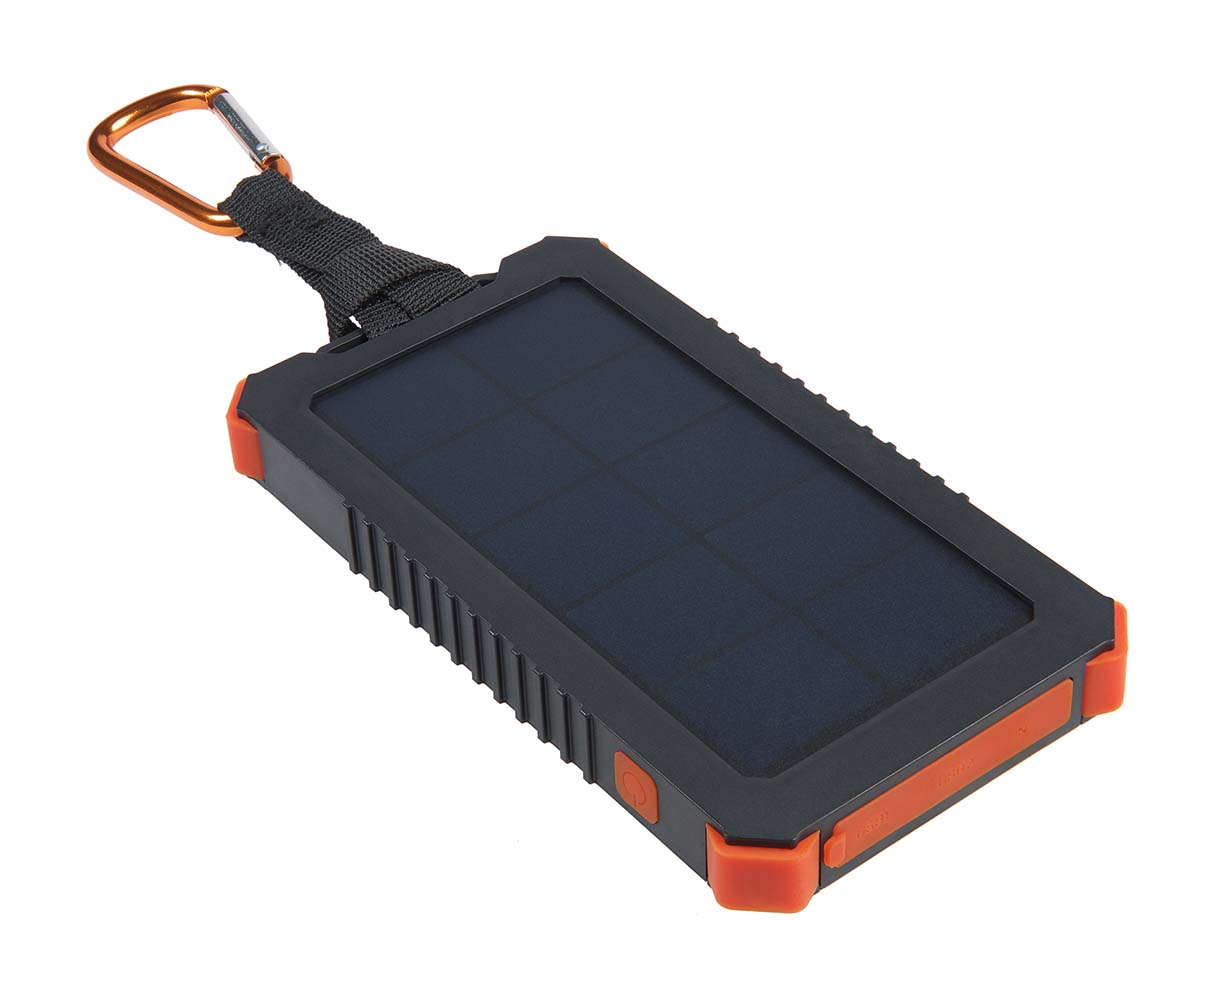 5921081 The Instinct Solar charger ideal for on the go. The charger is drop-resistant (1M) and splash-proof. The solar charger has an internal battery of 5,000mAh that can store enough energy to charge your smartphone up to 4 times! The solar charger is equipped with a handy torch. The internal battery can easily be recharged via USB, mains power or by using the solar panel.